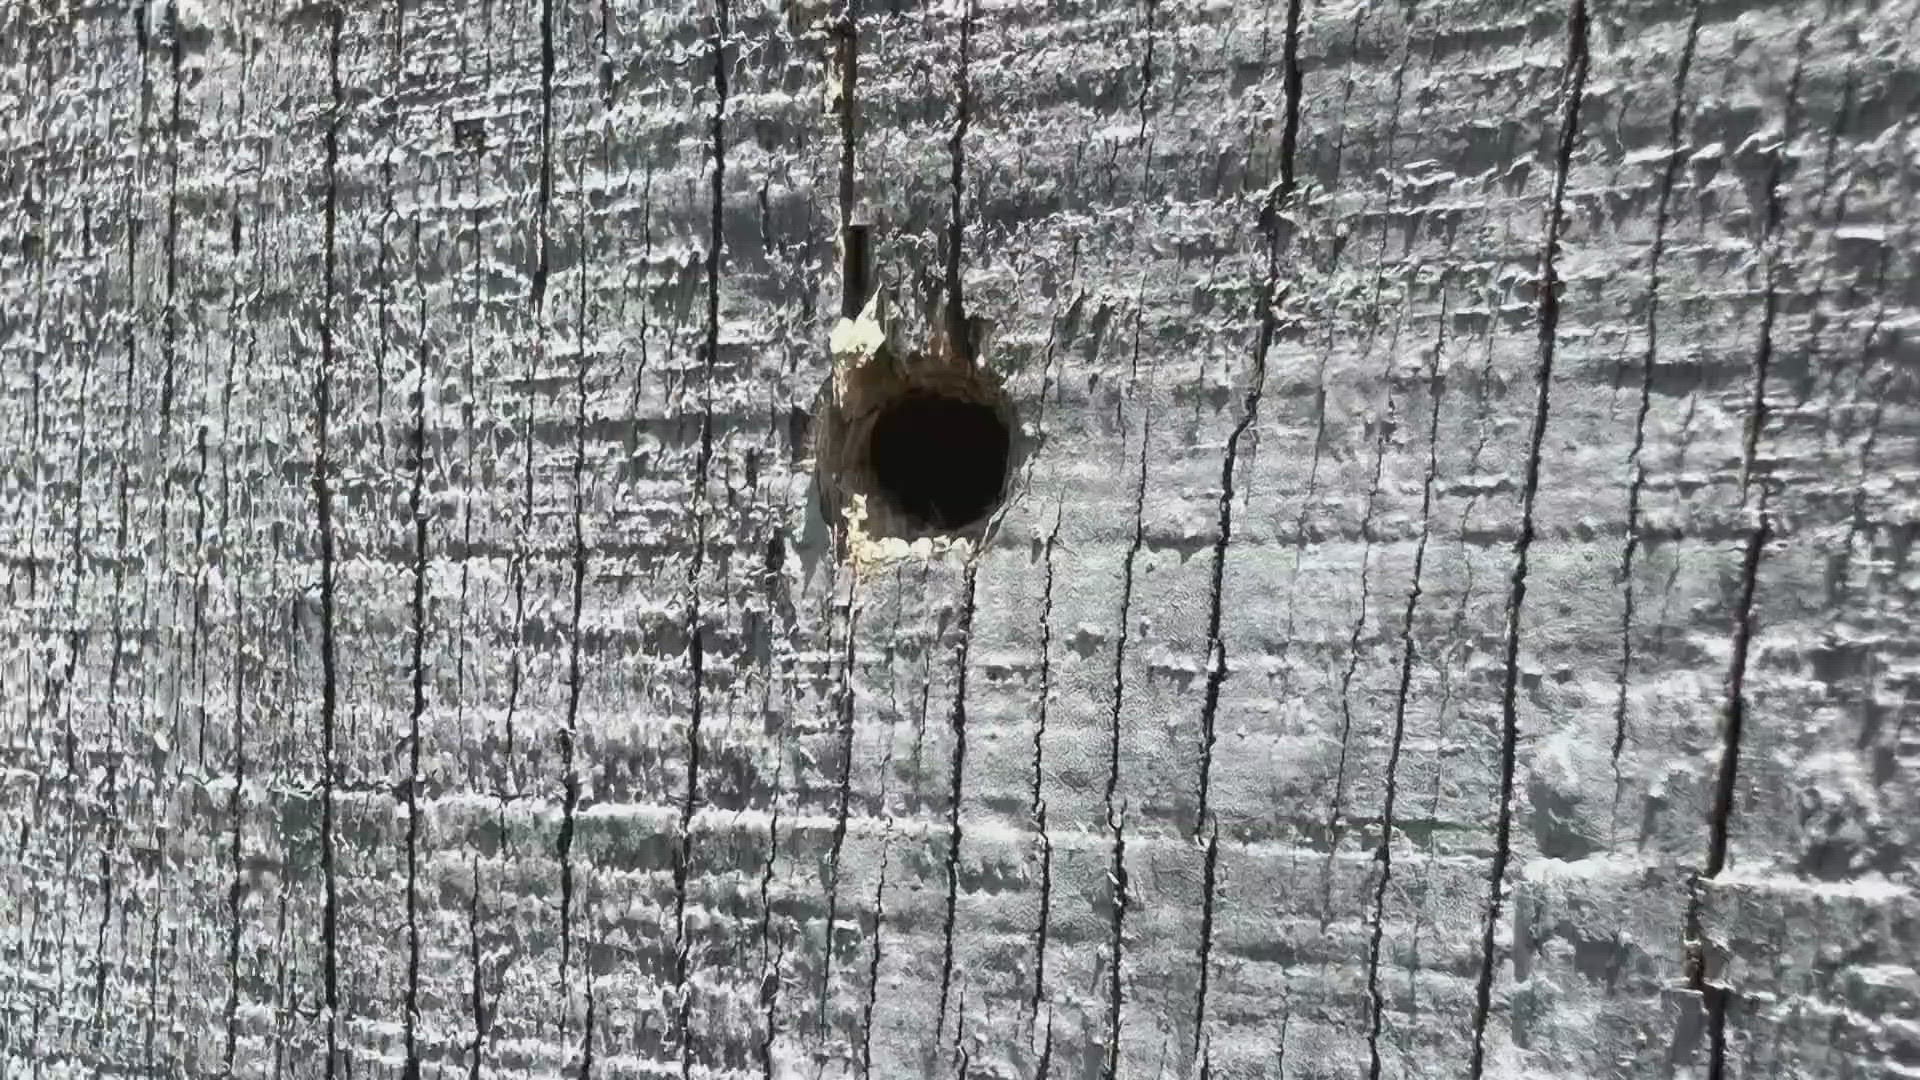 Fort Worth community member Christopher Hernandez showed WFAA a bullet hole that was found on the side of his home near the scene.